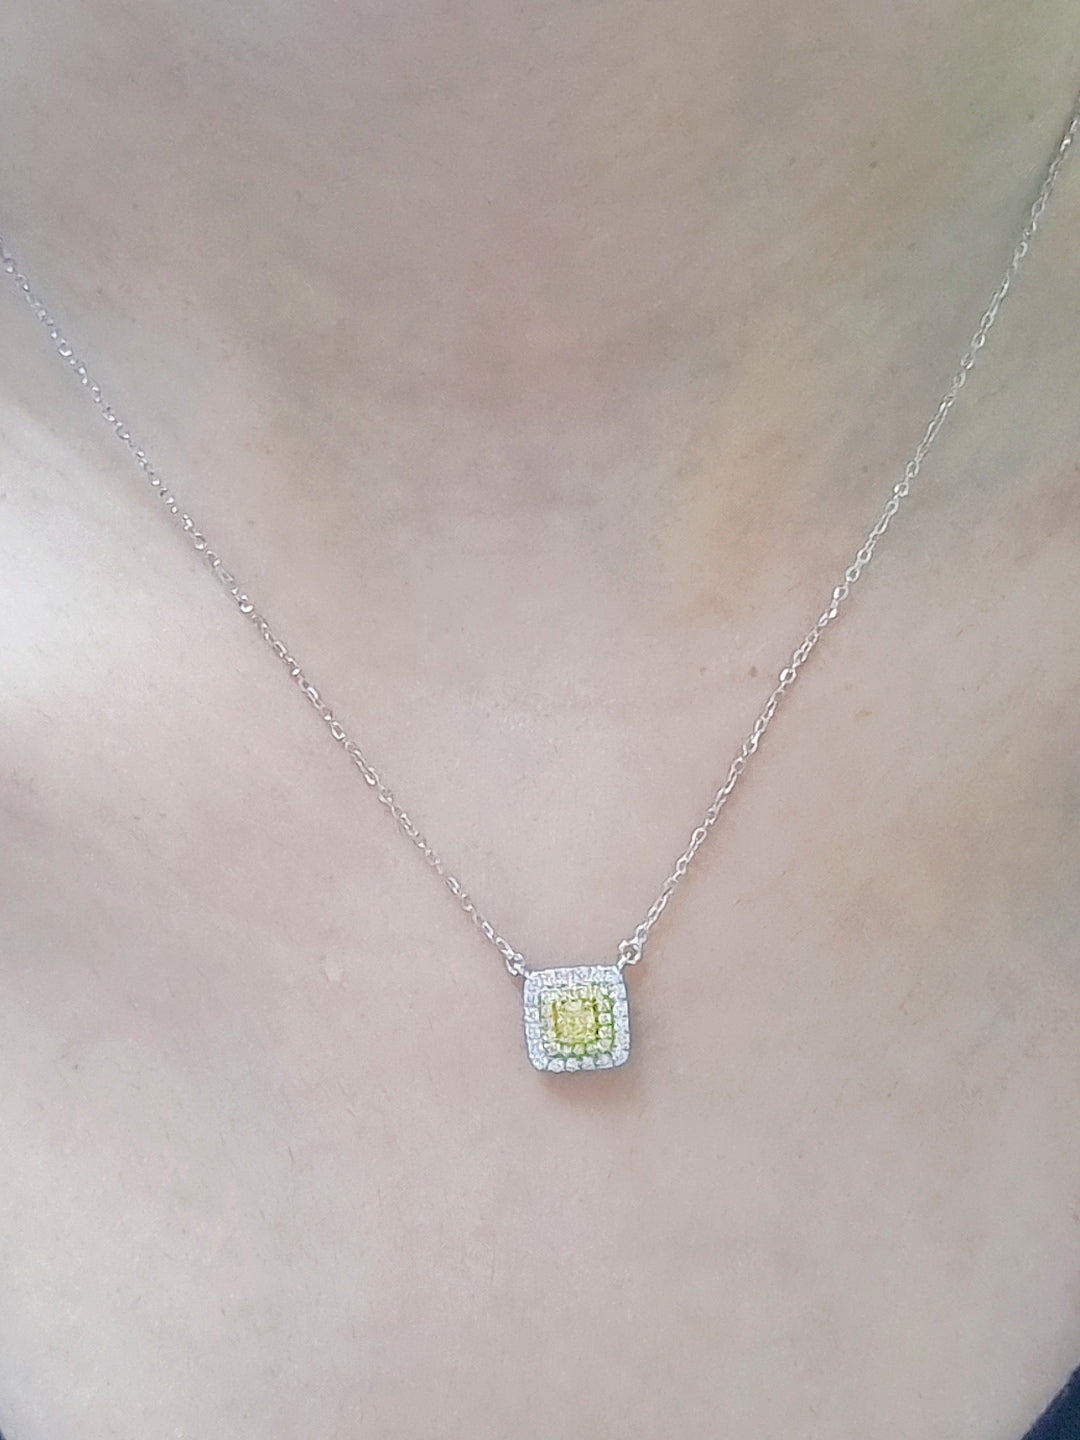 Fancy Yellow Diamond And White Diamond Pendant In 18k White Gold With Chain.